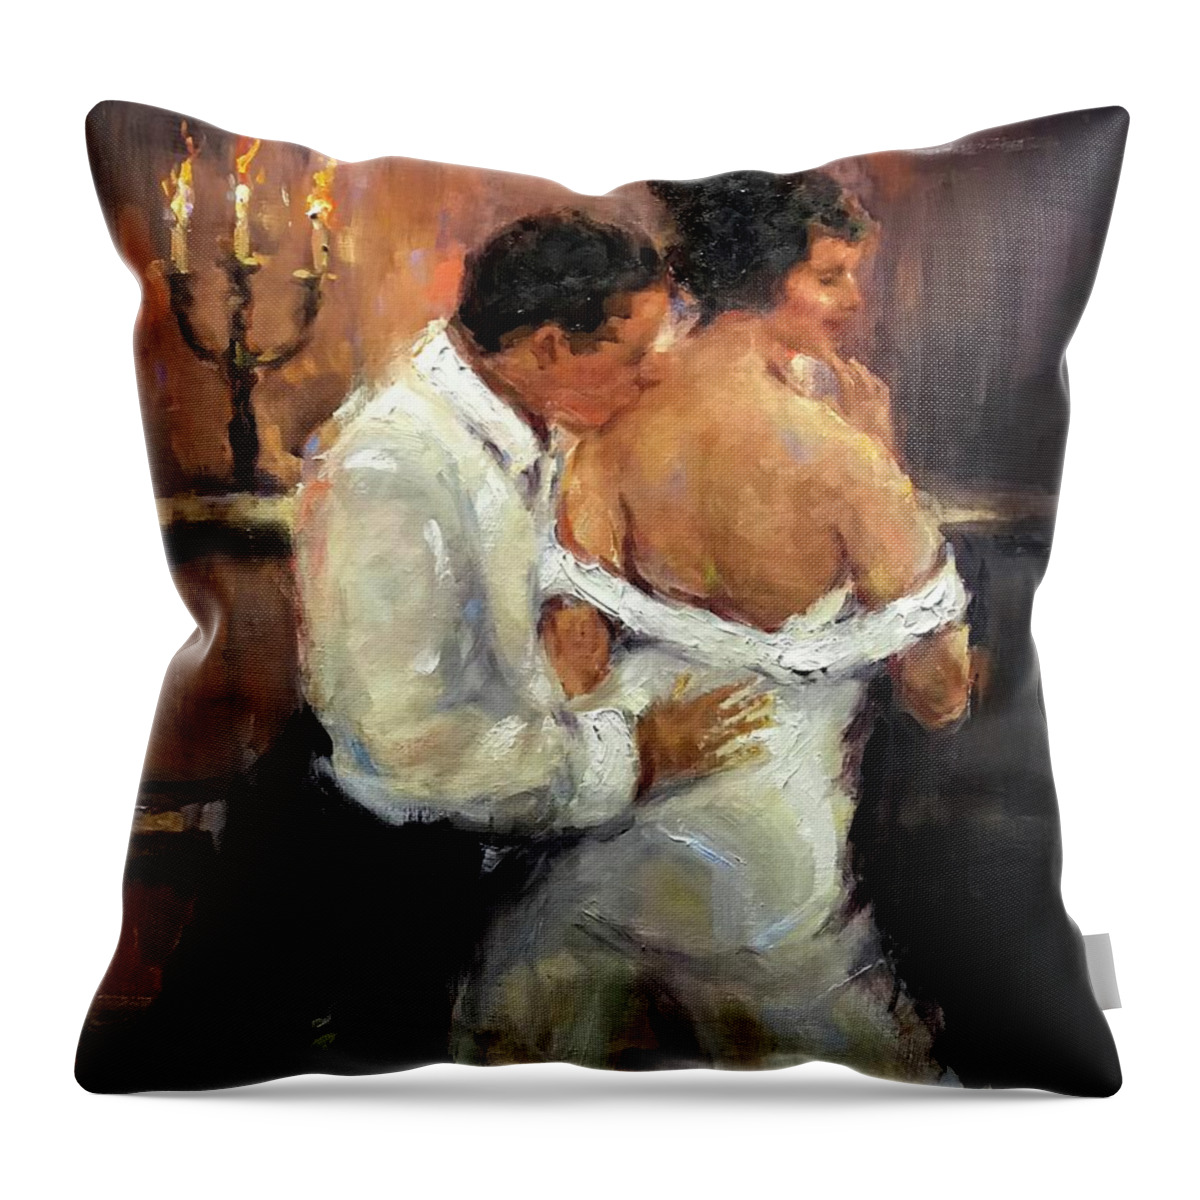  Throw Pillow featuring the painting Mi Amore by Ashlee Trcka